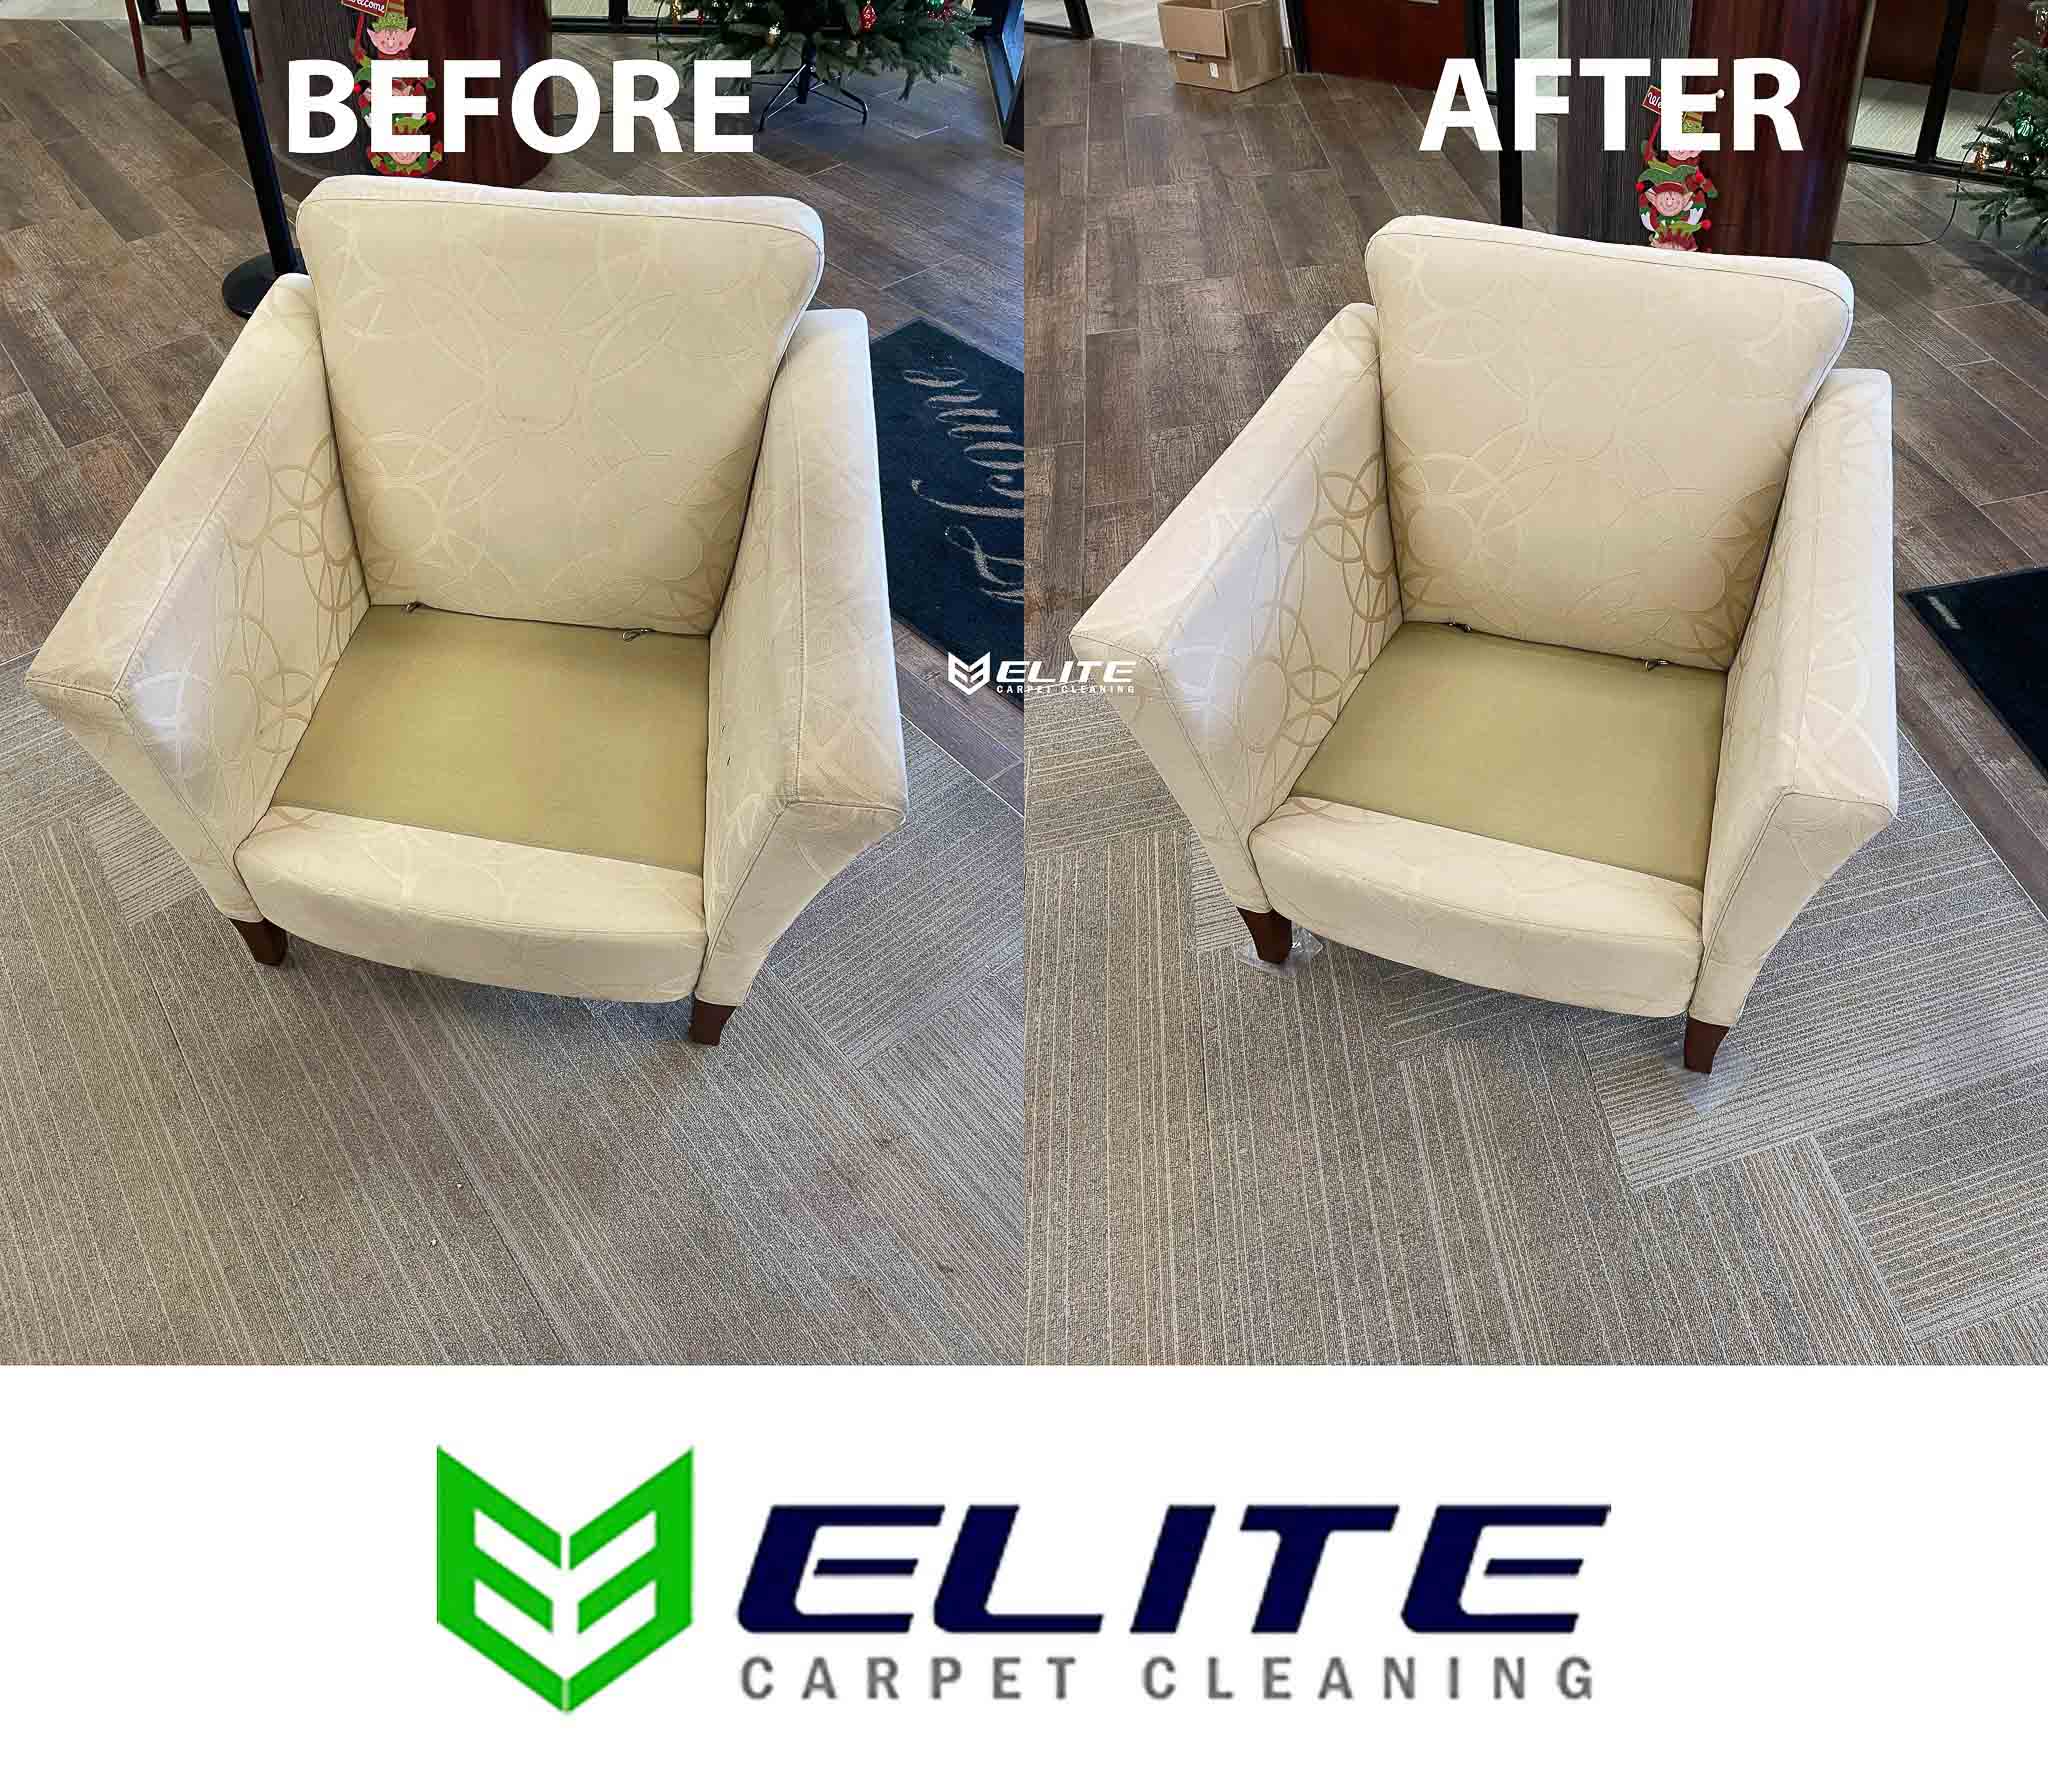 White Chair with clean upholstery in odessa tx. This chair was cleaned by Elite Carpet cleaning.